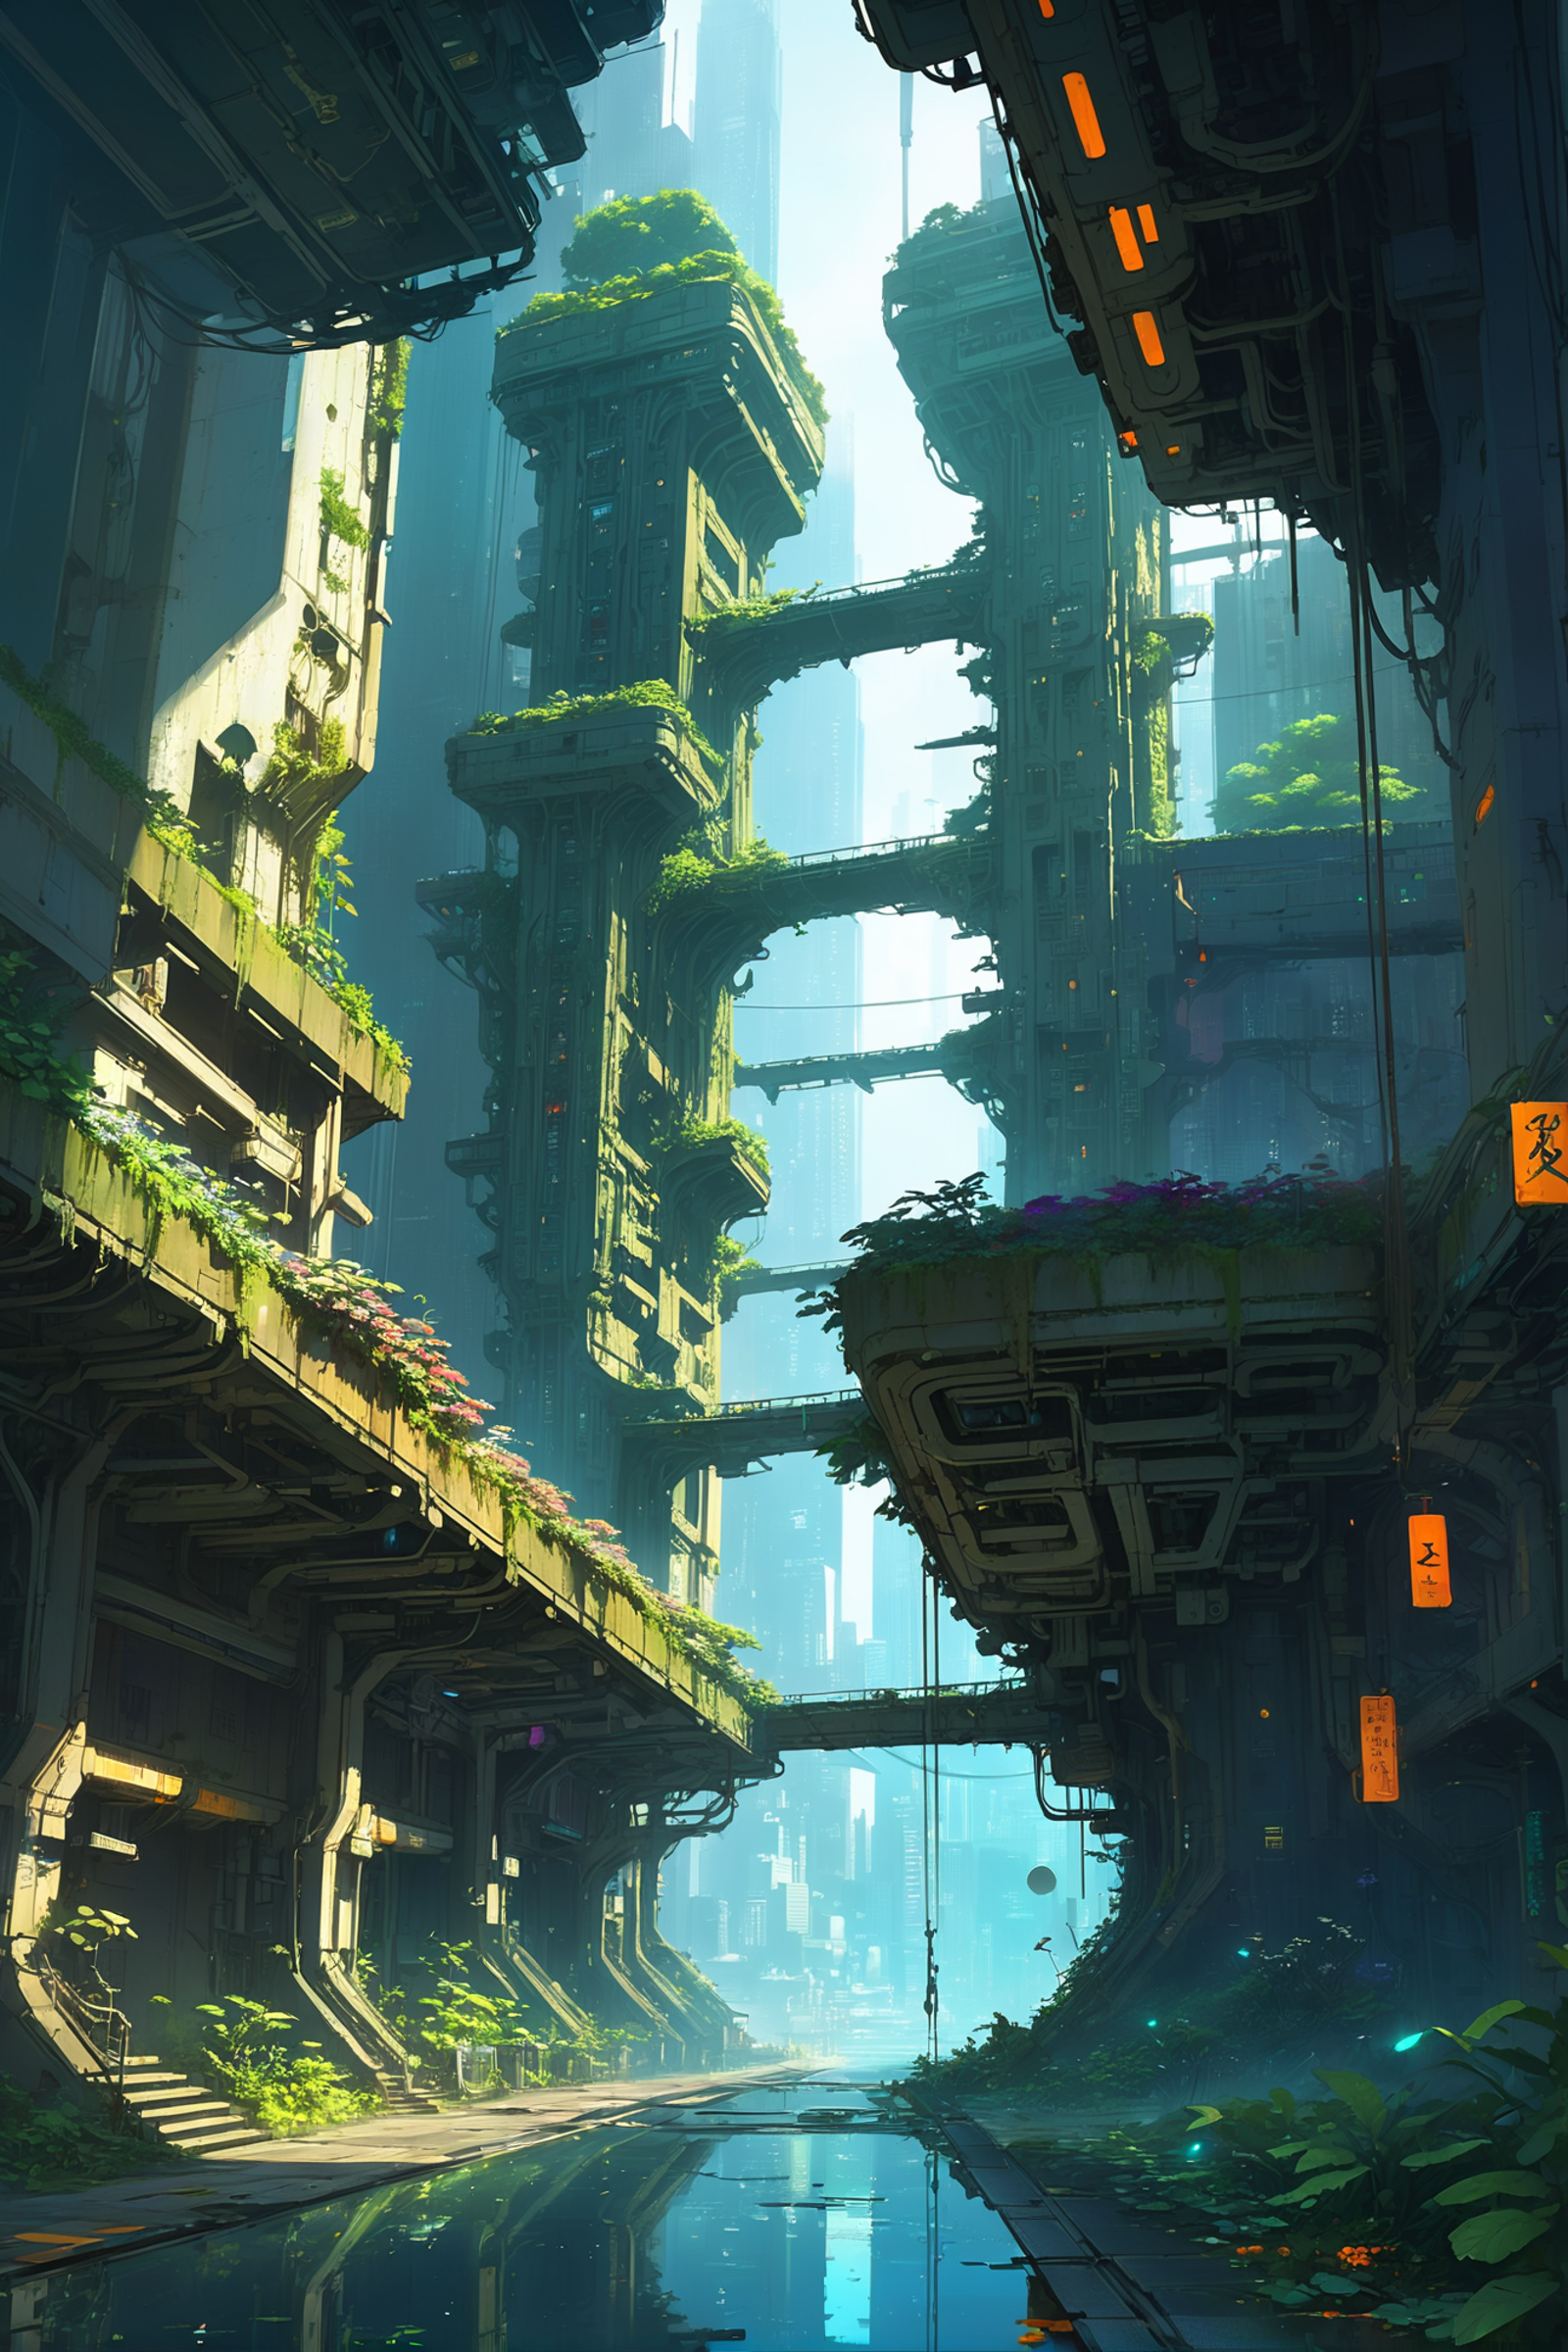 A Futuristic Cityscape with Tall Buildings and Plants Growing on Them